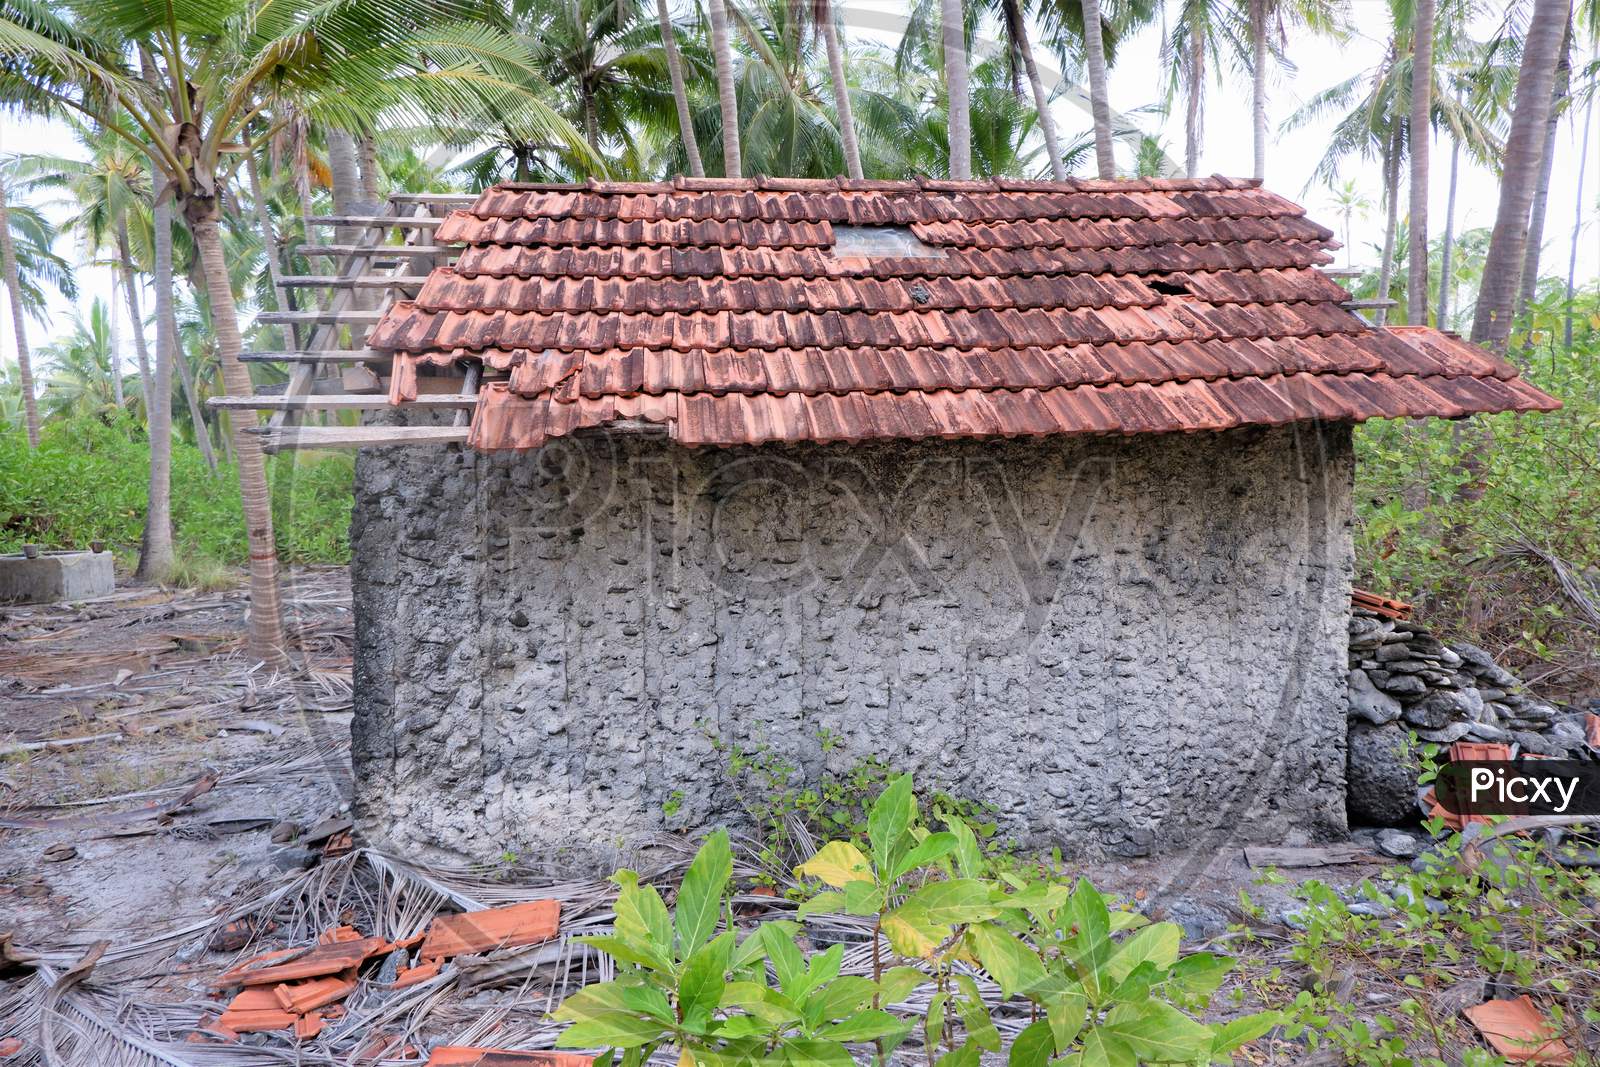 olden traditional house in lakshdweep